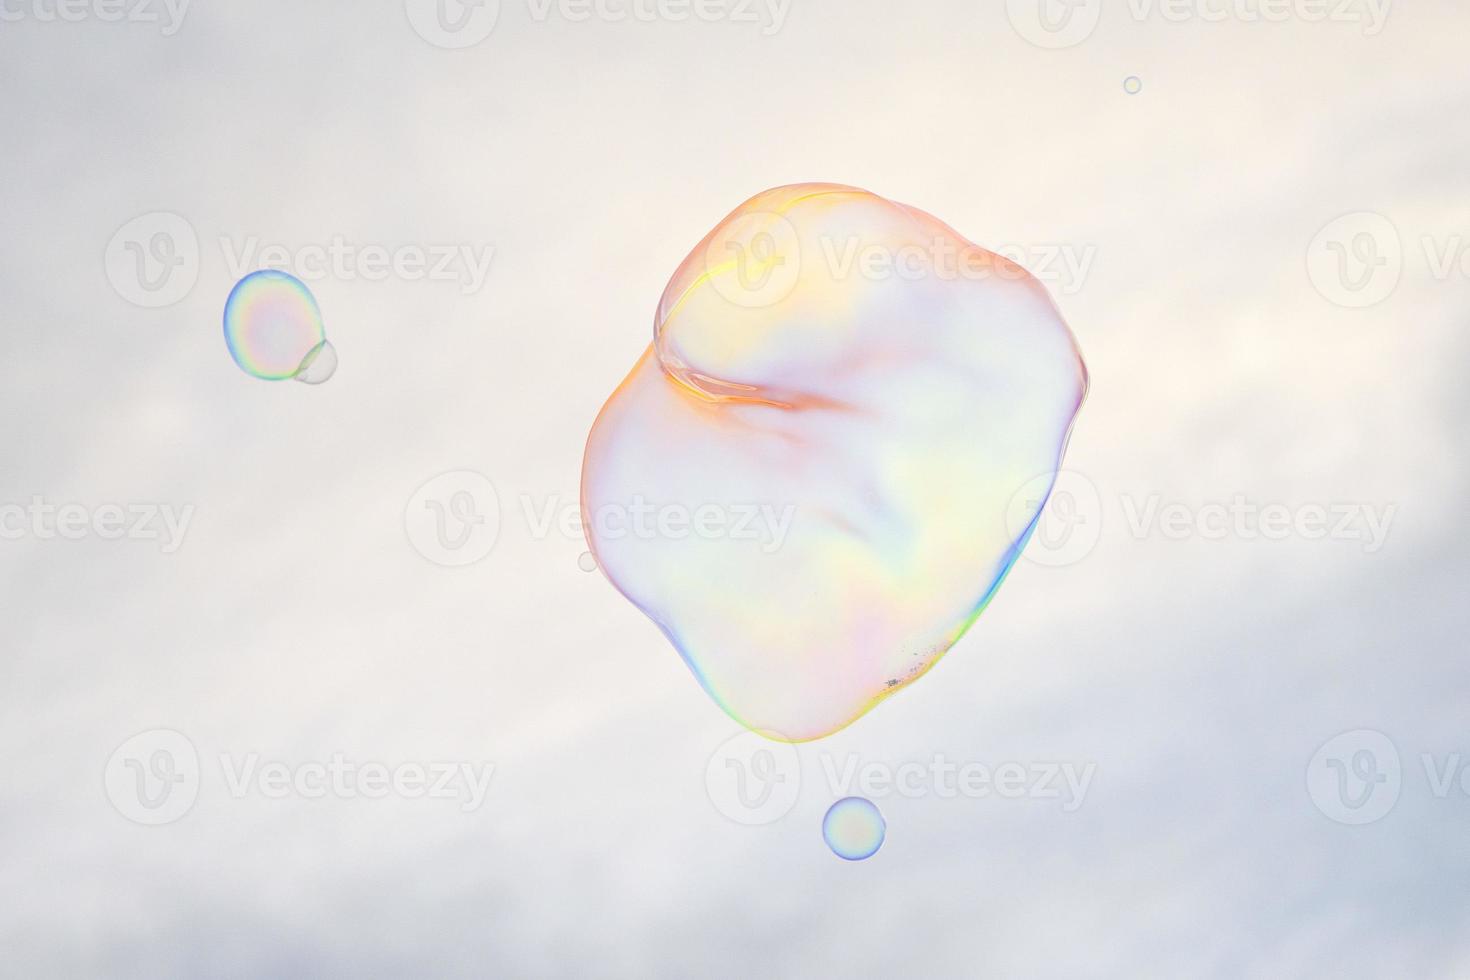 giant soap bubble on the sky background photo